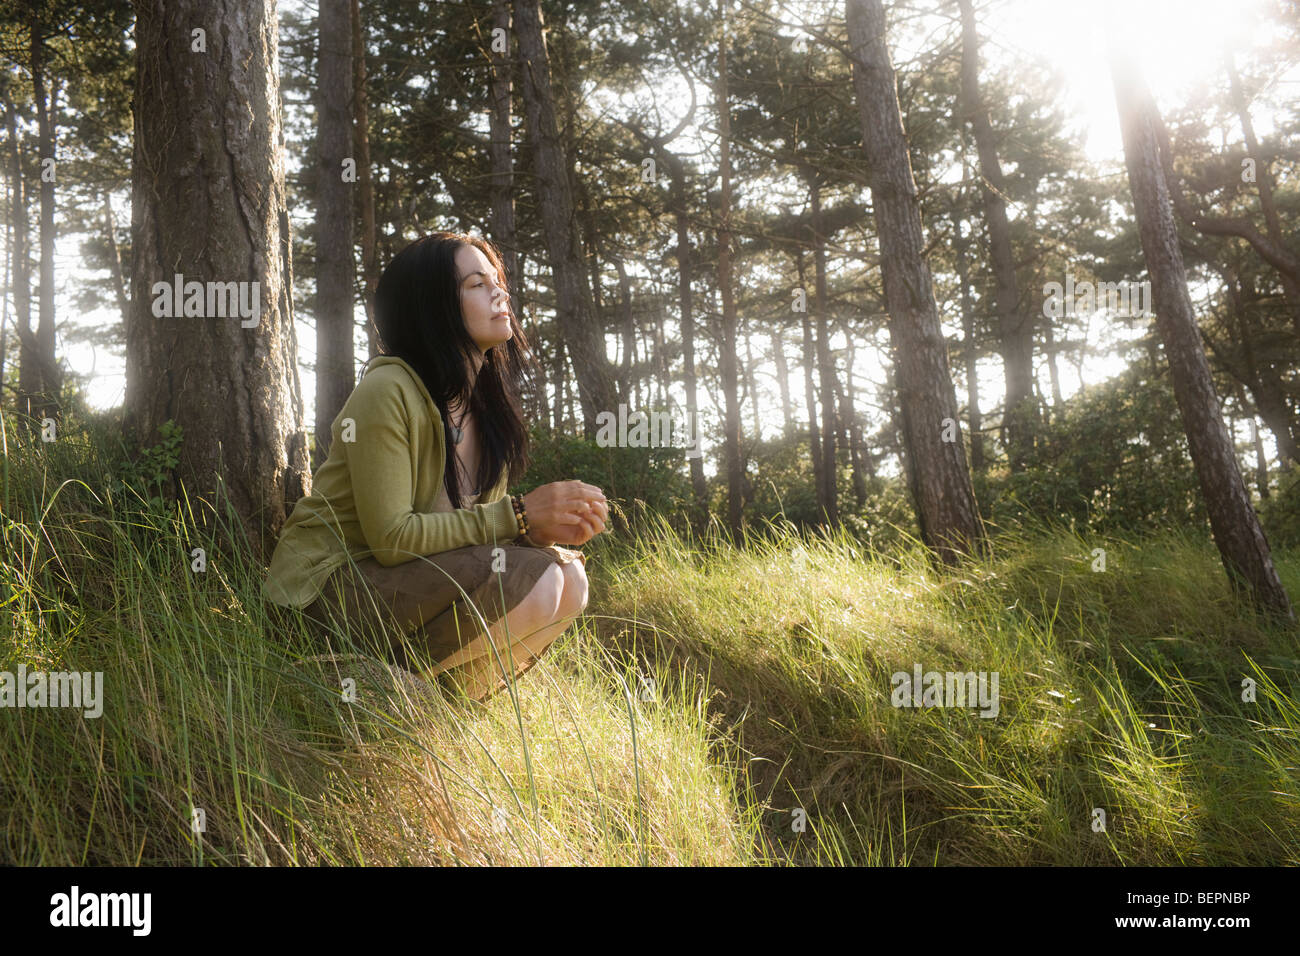 Woman crouching in contemplation Stock Photo